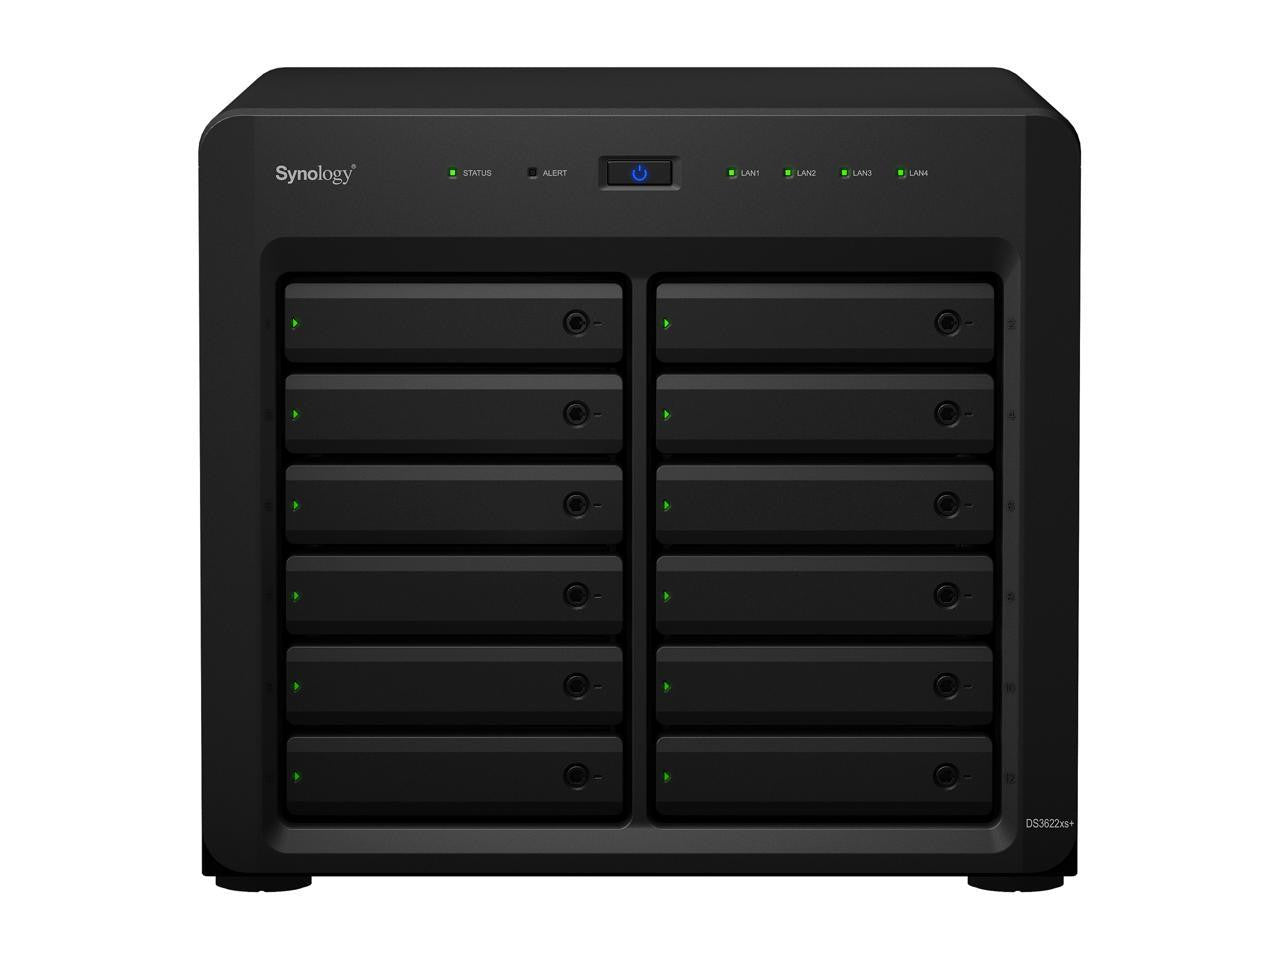 DS3622xs+ 12-BAY DiskStation with 48GB RAM and 48TB (12 x 4TB) of Synology Enterprise Drives